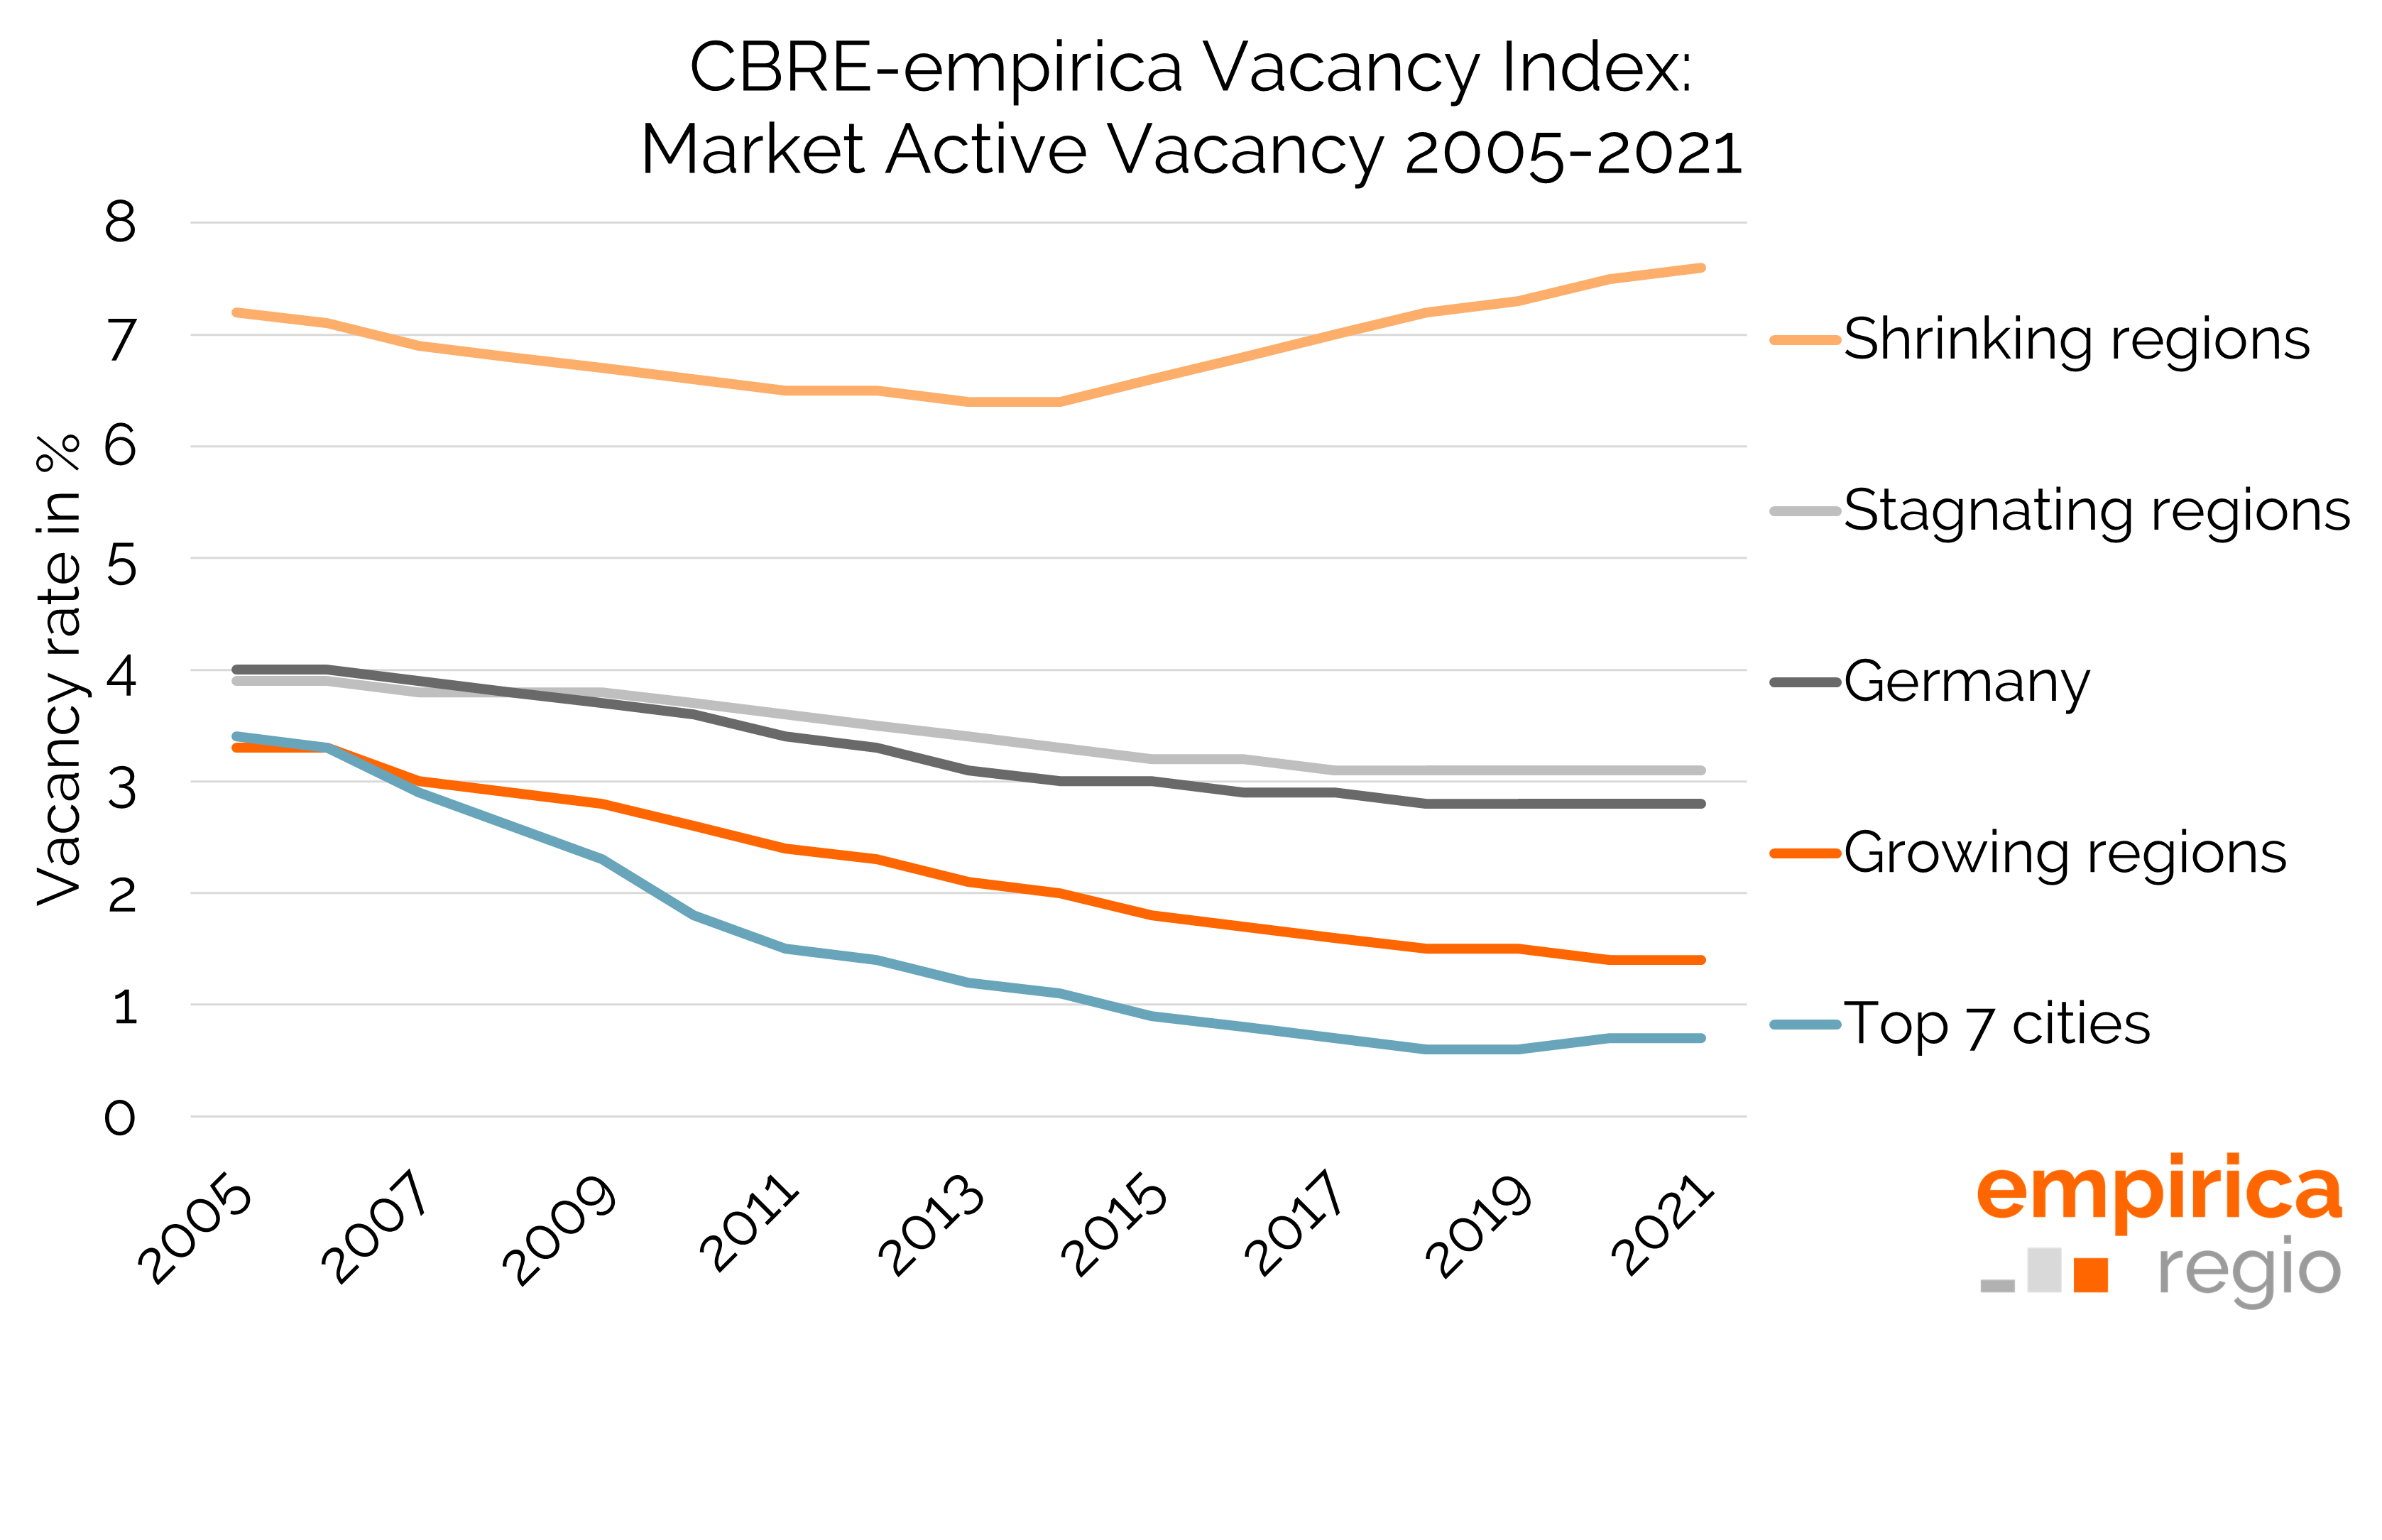 CBRE-empirica Vacancy Index for selected region types 2005 to 2021